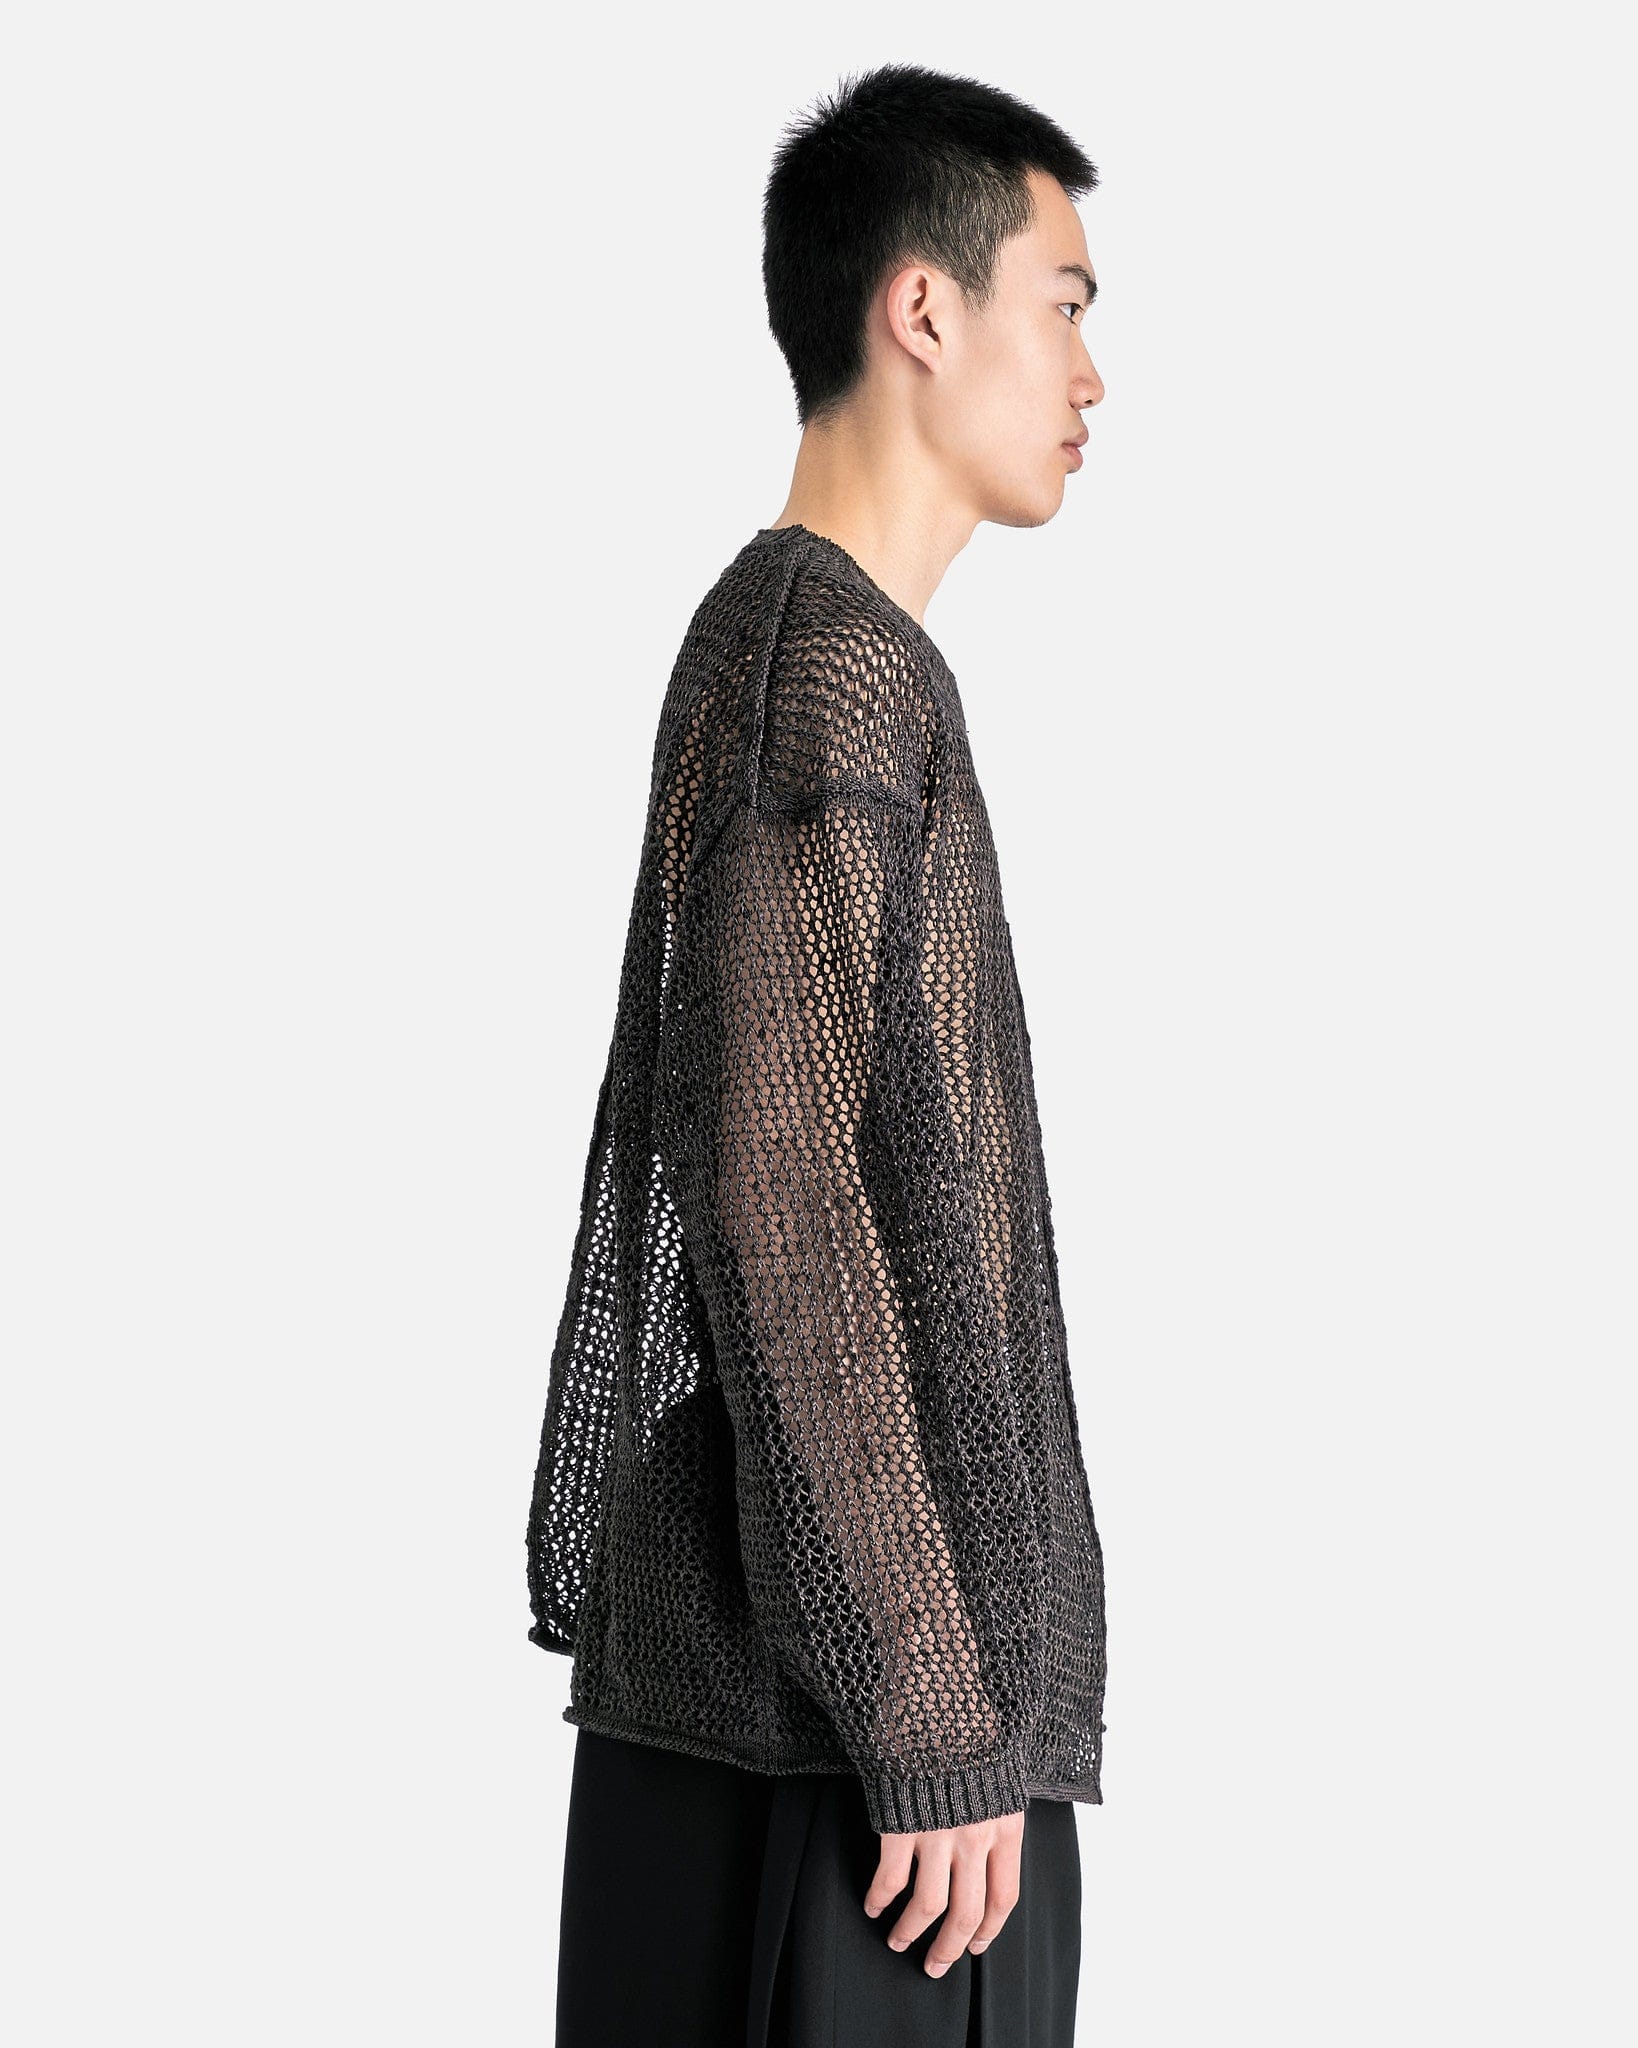 Yohji Yamamoto Pour Homme Men's Tops Uneven Long Sleeve in Charcoal